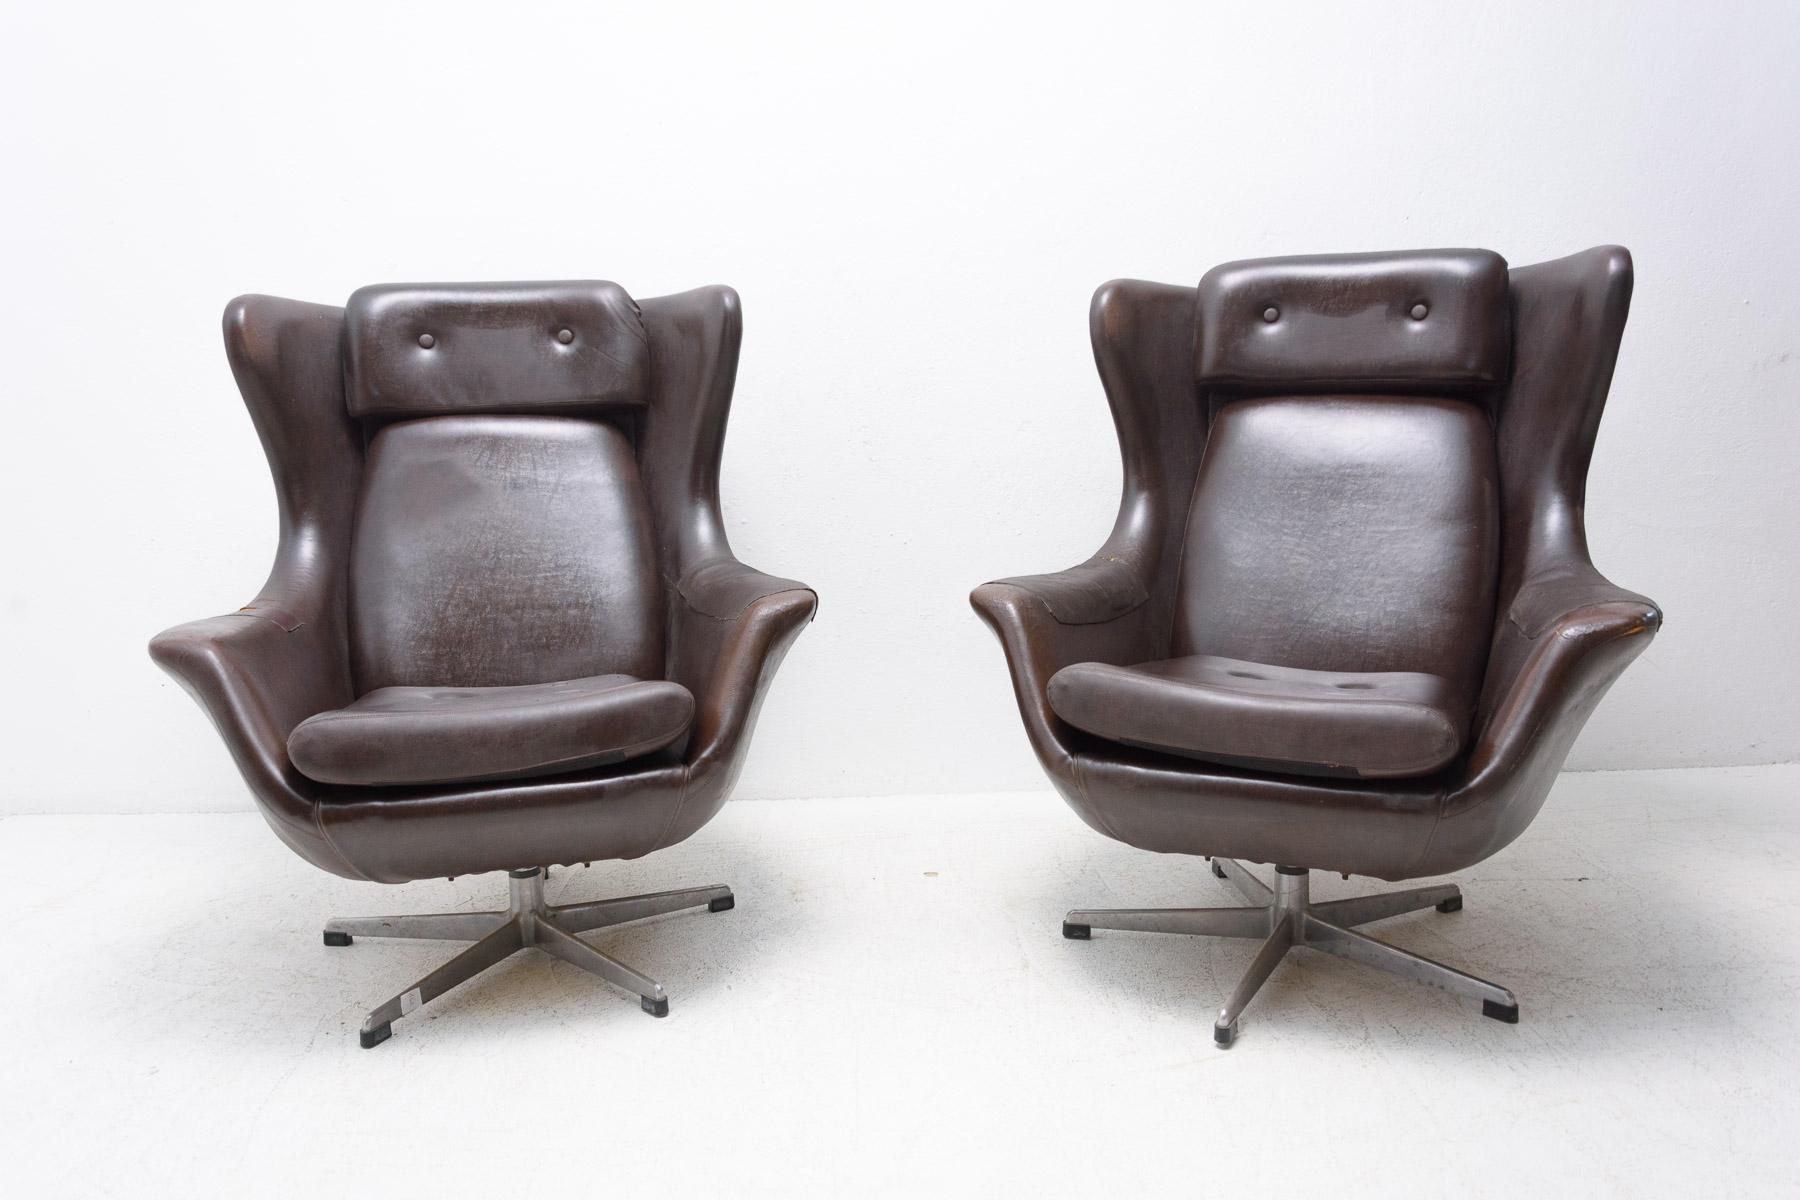 Pair of swivel armchairs from the 1970s manufactured by UP Zavody in the former Czechoslovakia.
These iconic chairs have a slightly curved shaped design on an aluminum swivel base. They are upholstered in original black leather. The leather is